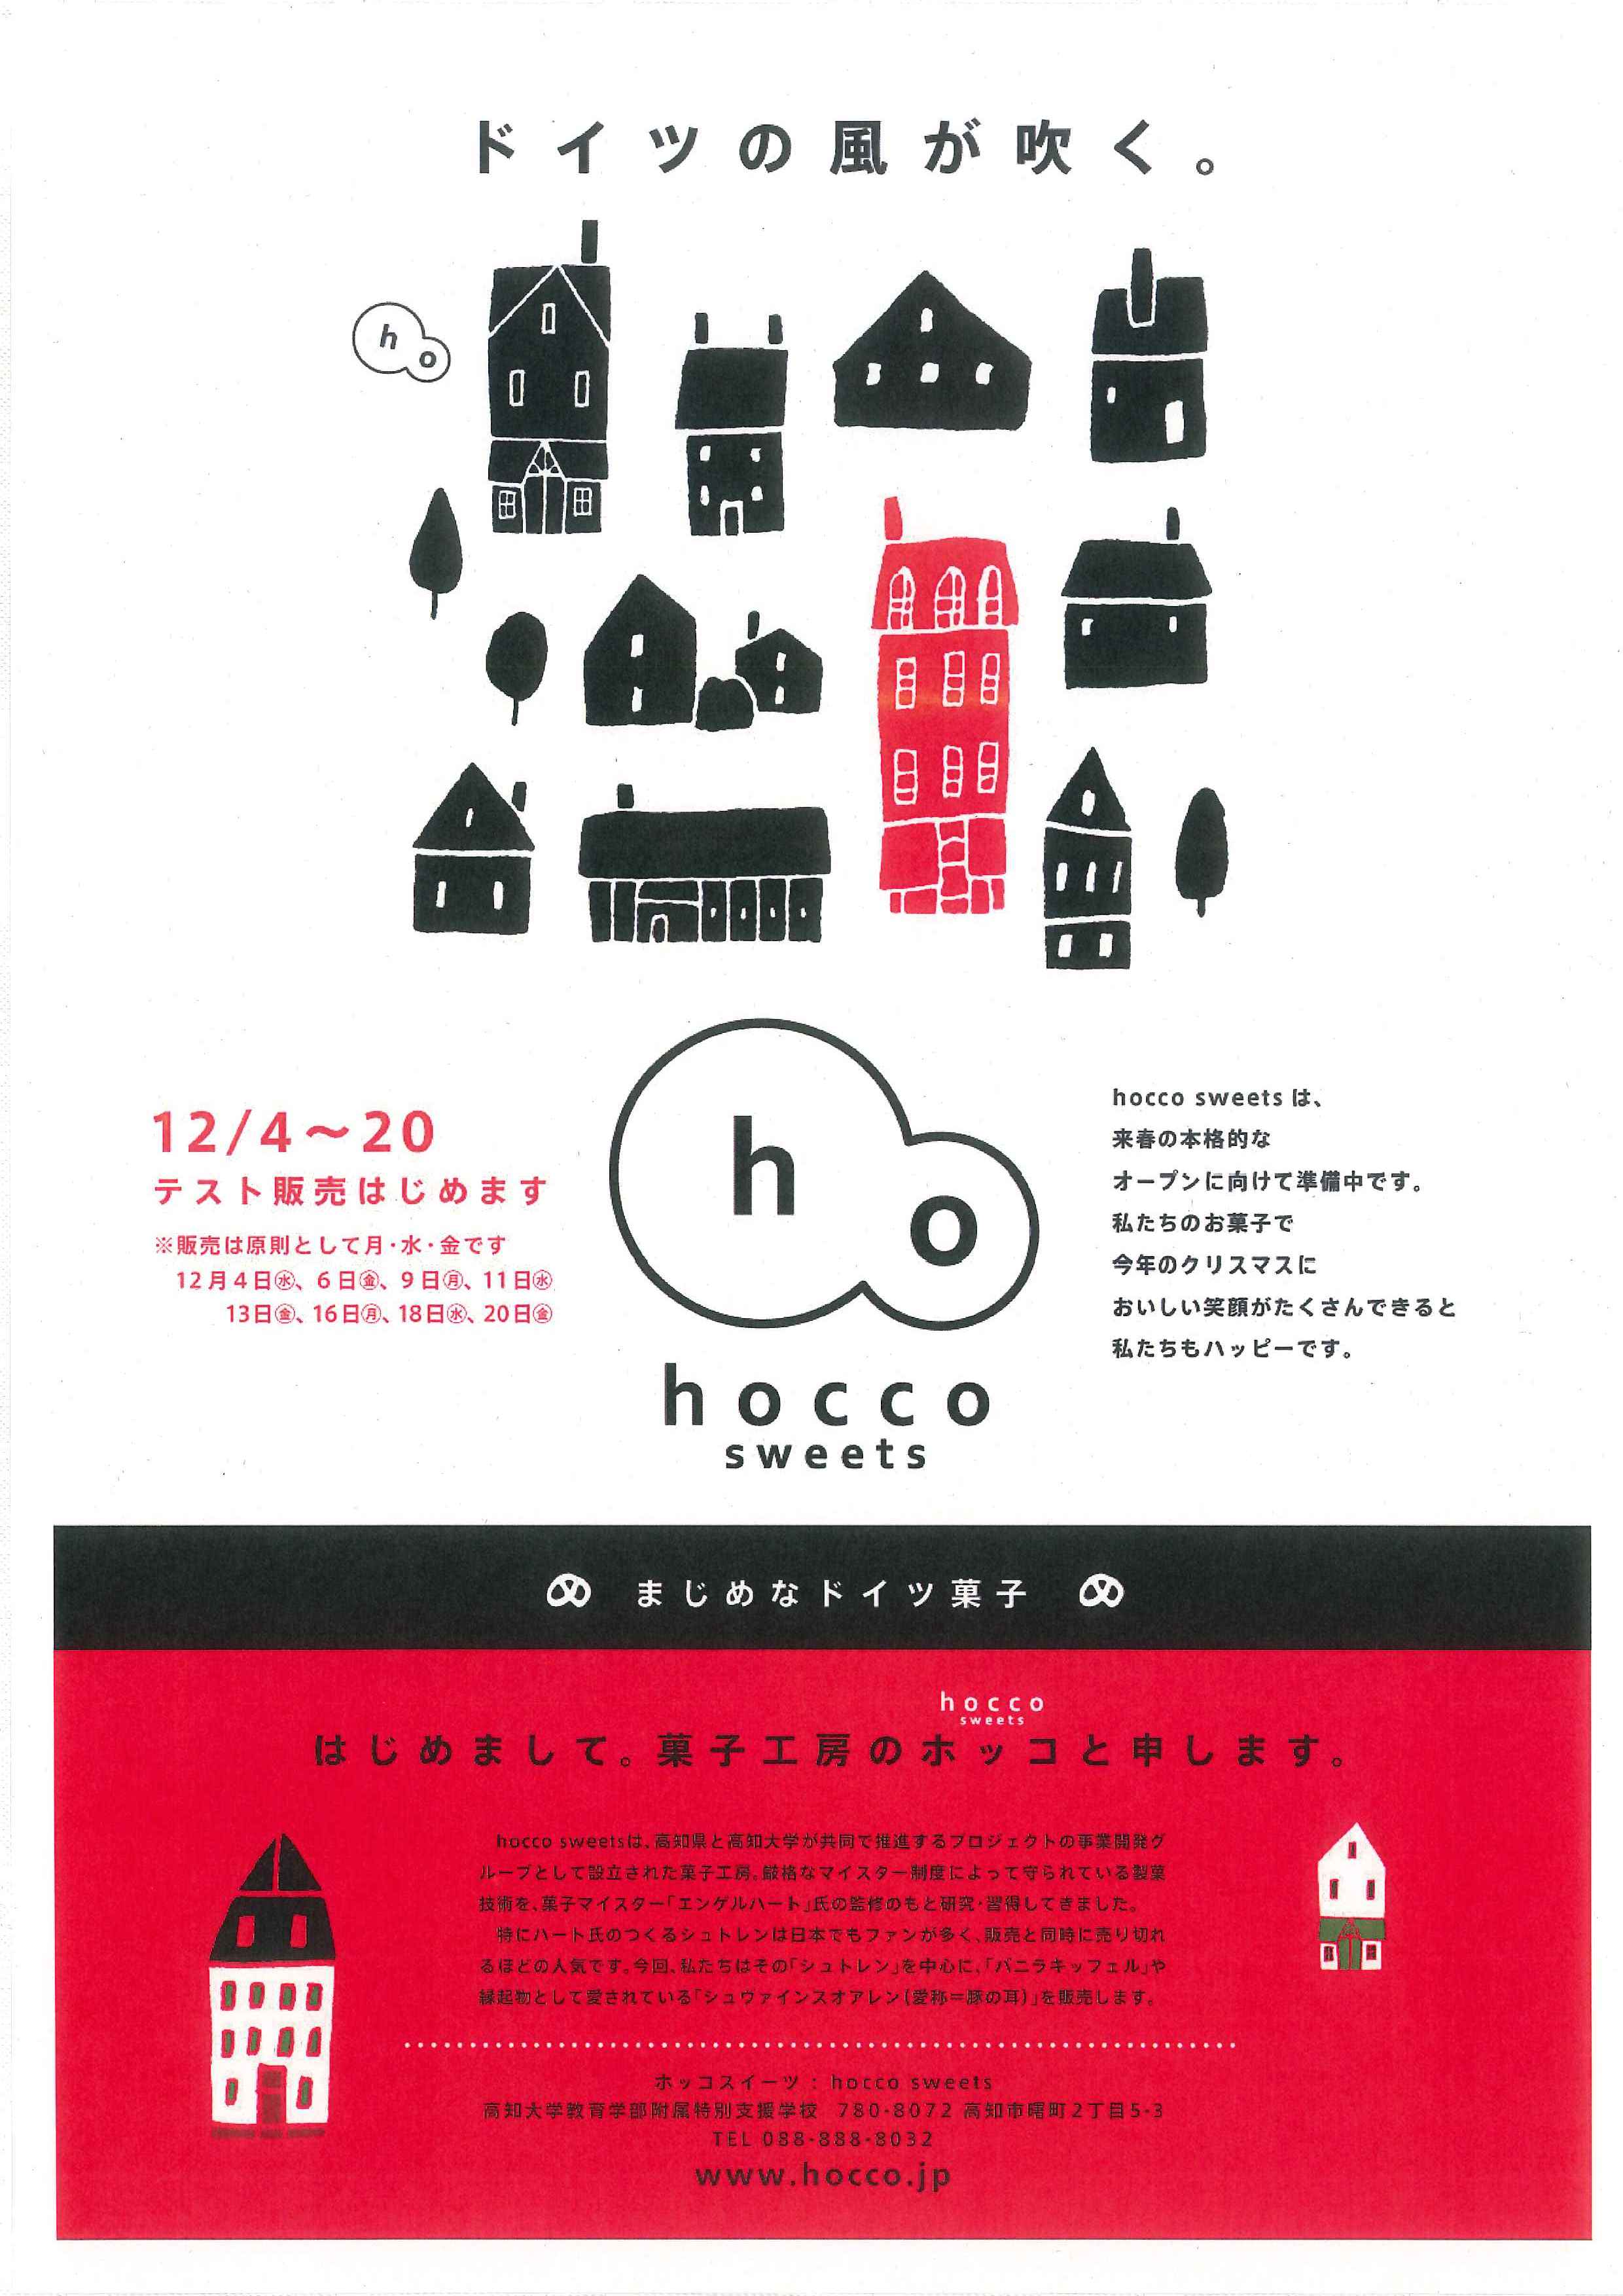 hocco sweets_1